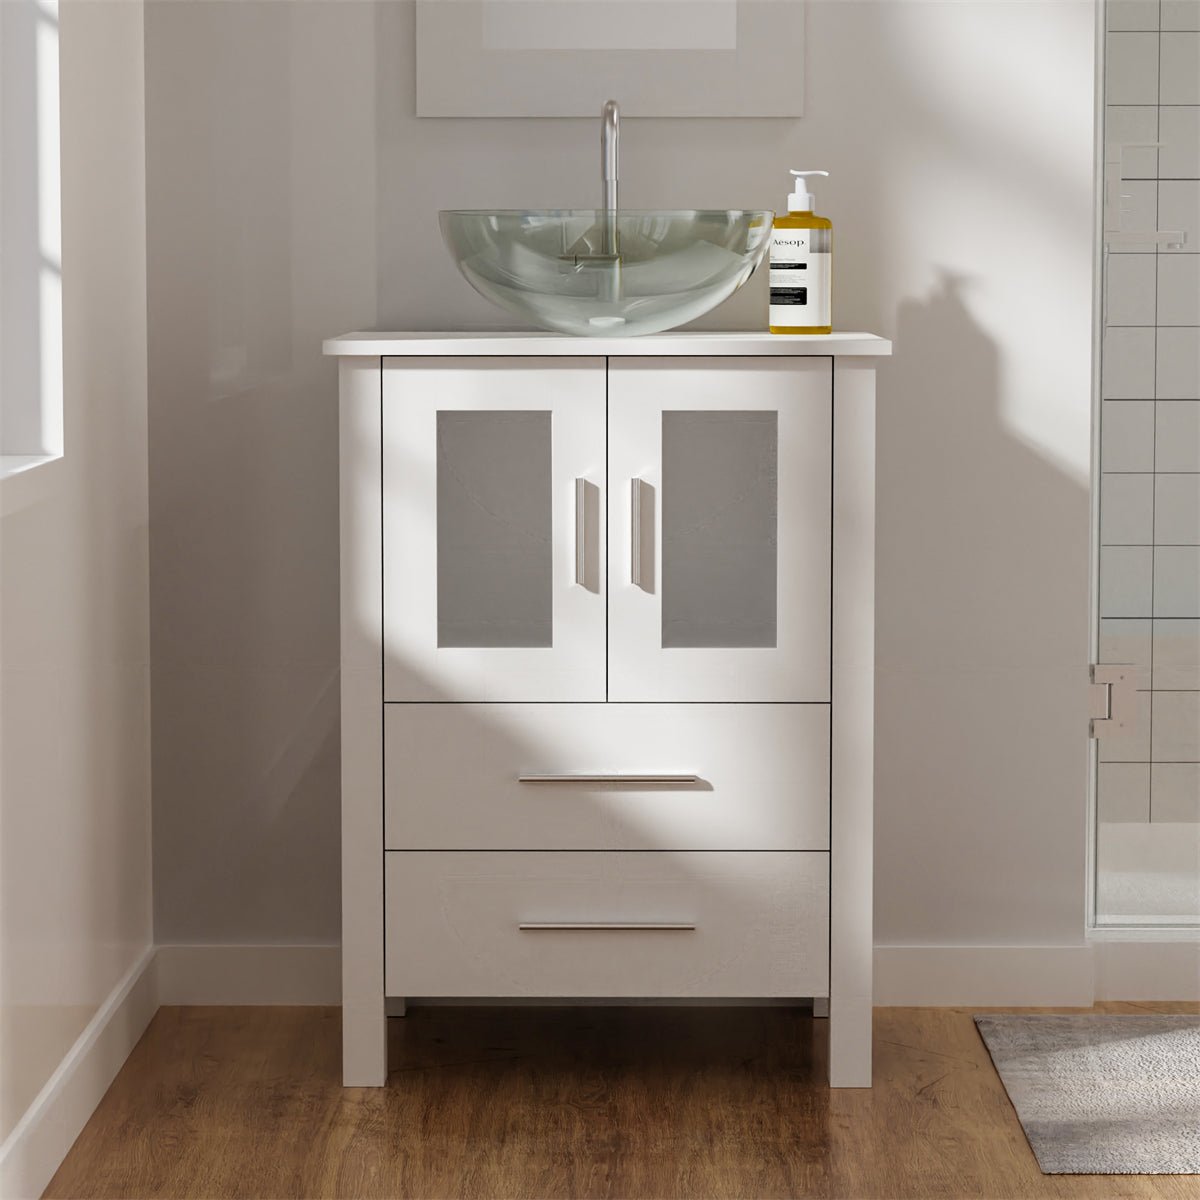 ExBrite 24 in. W x 19 in. D x 32.3 in. H Single Sink Bath Vanity with Mirrors - ExBriteUSA